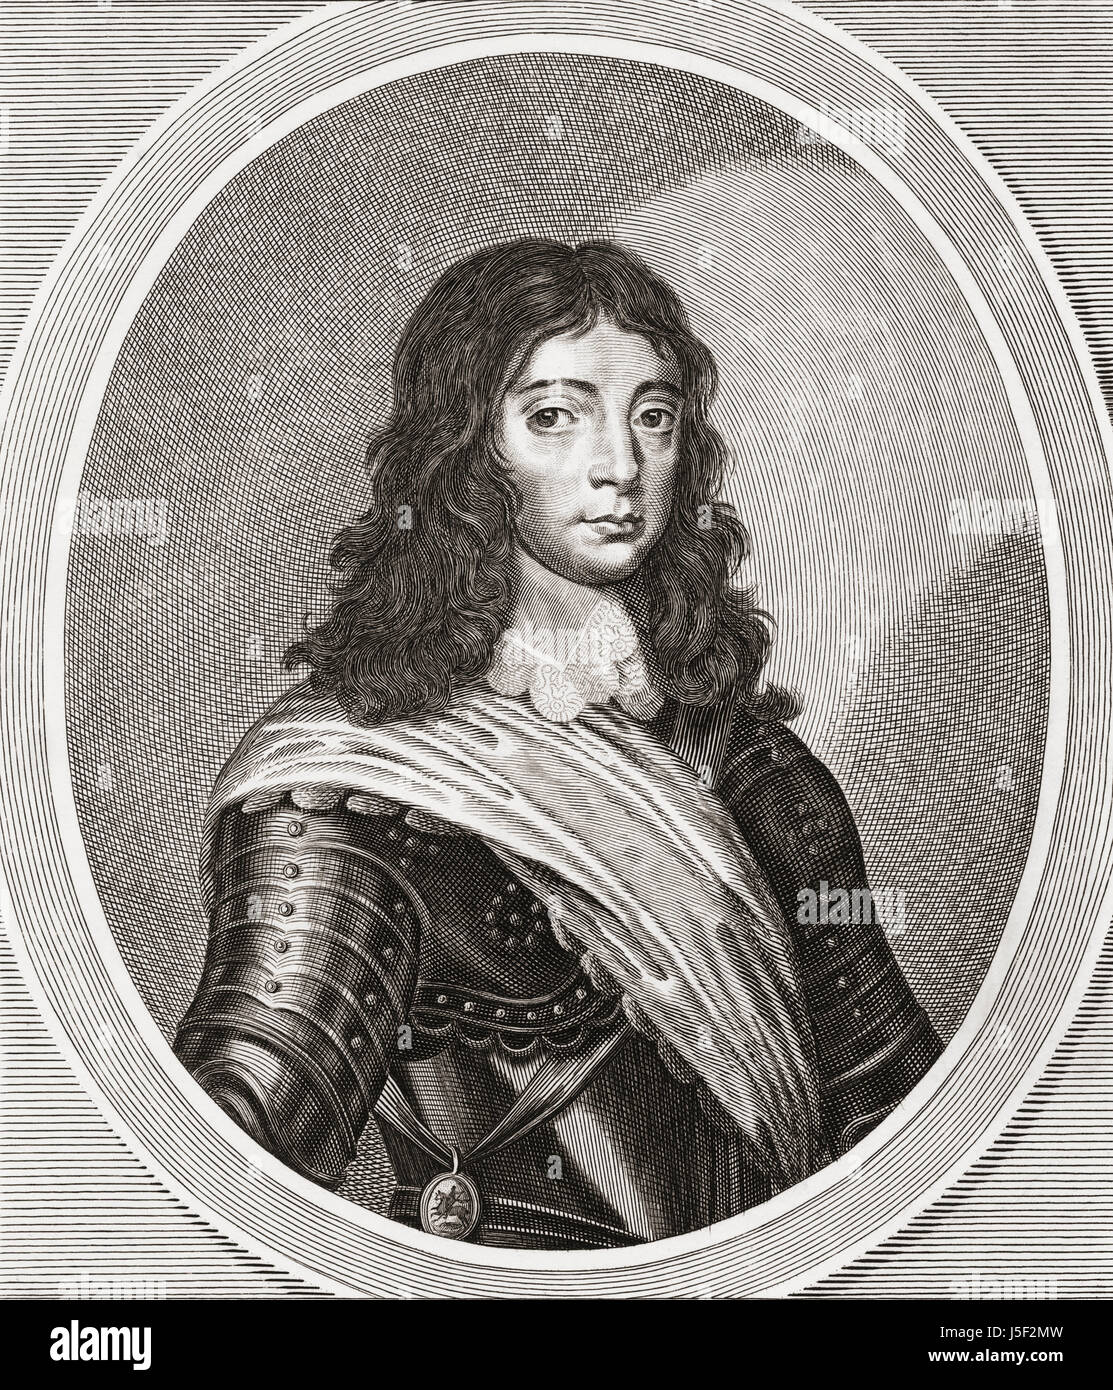 King James II of England, also known as the Duke of York, 1633 to 1701. Stock Photo